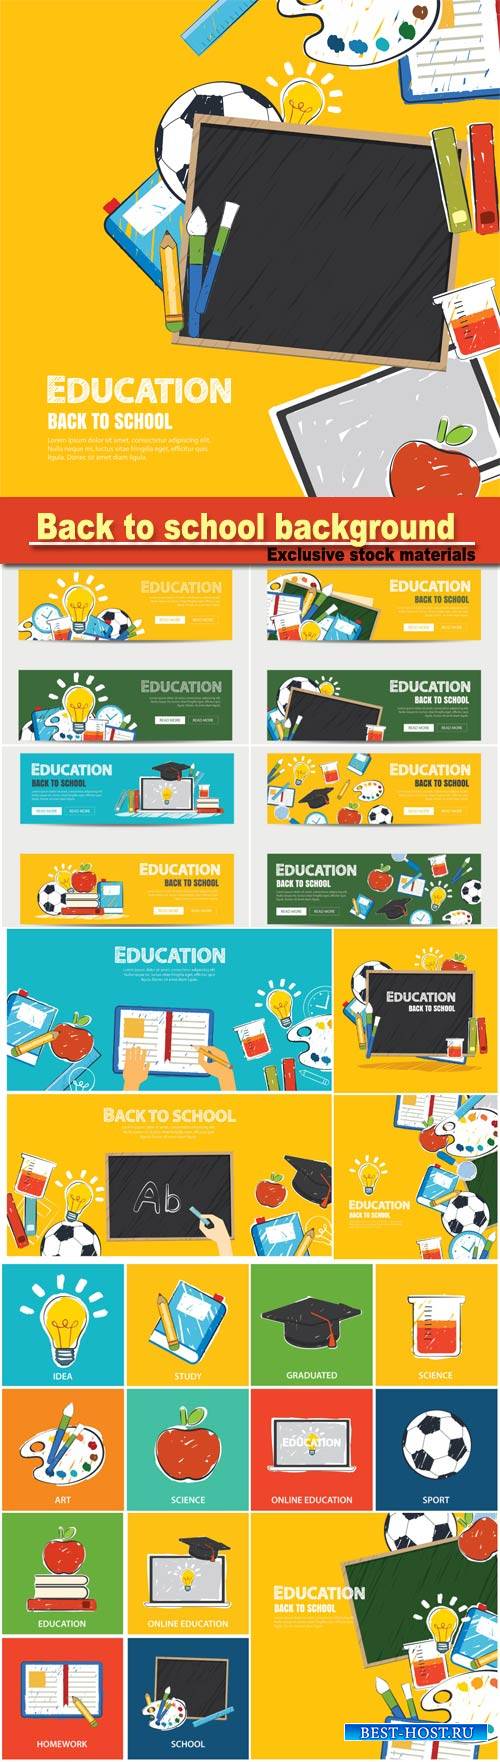 Education banner and back to school background template